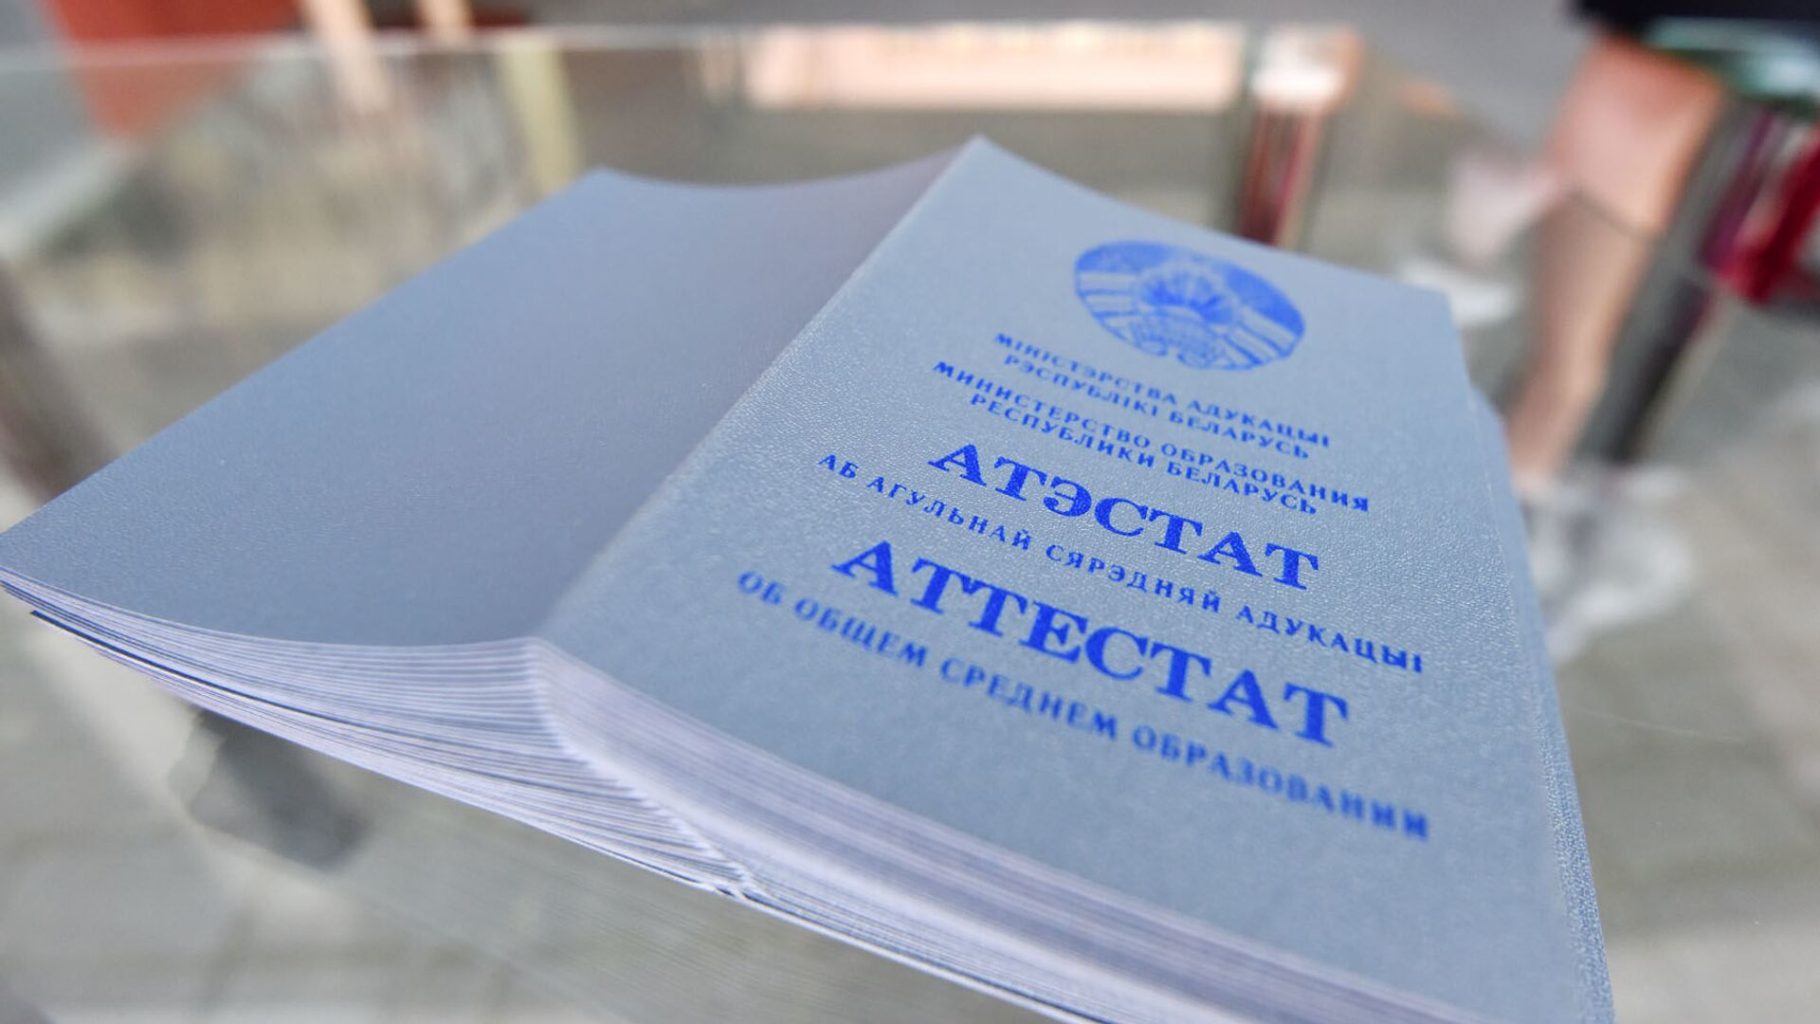 Apostille of the certificate of secondary education